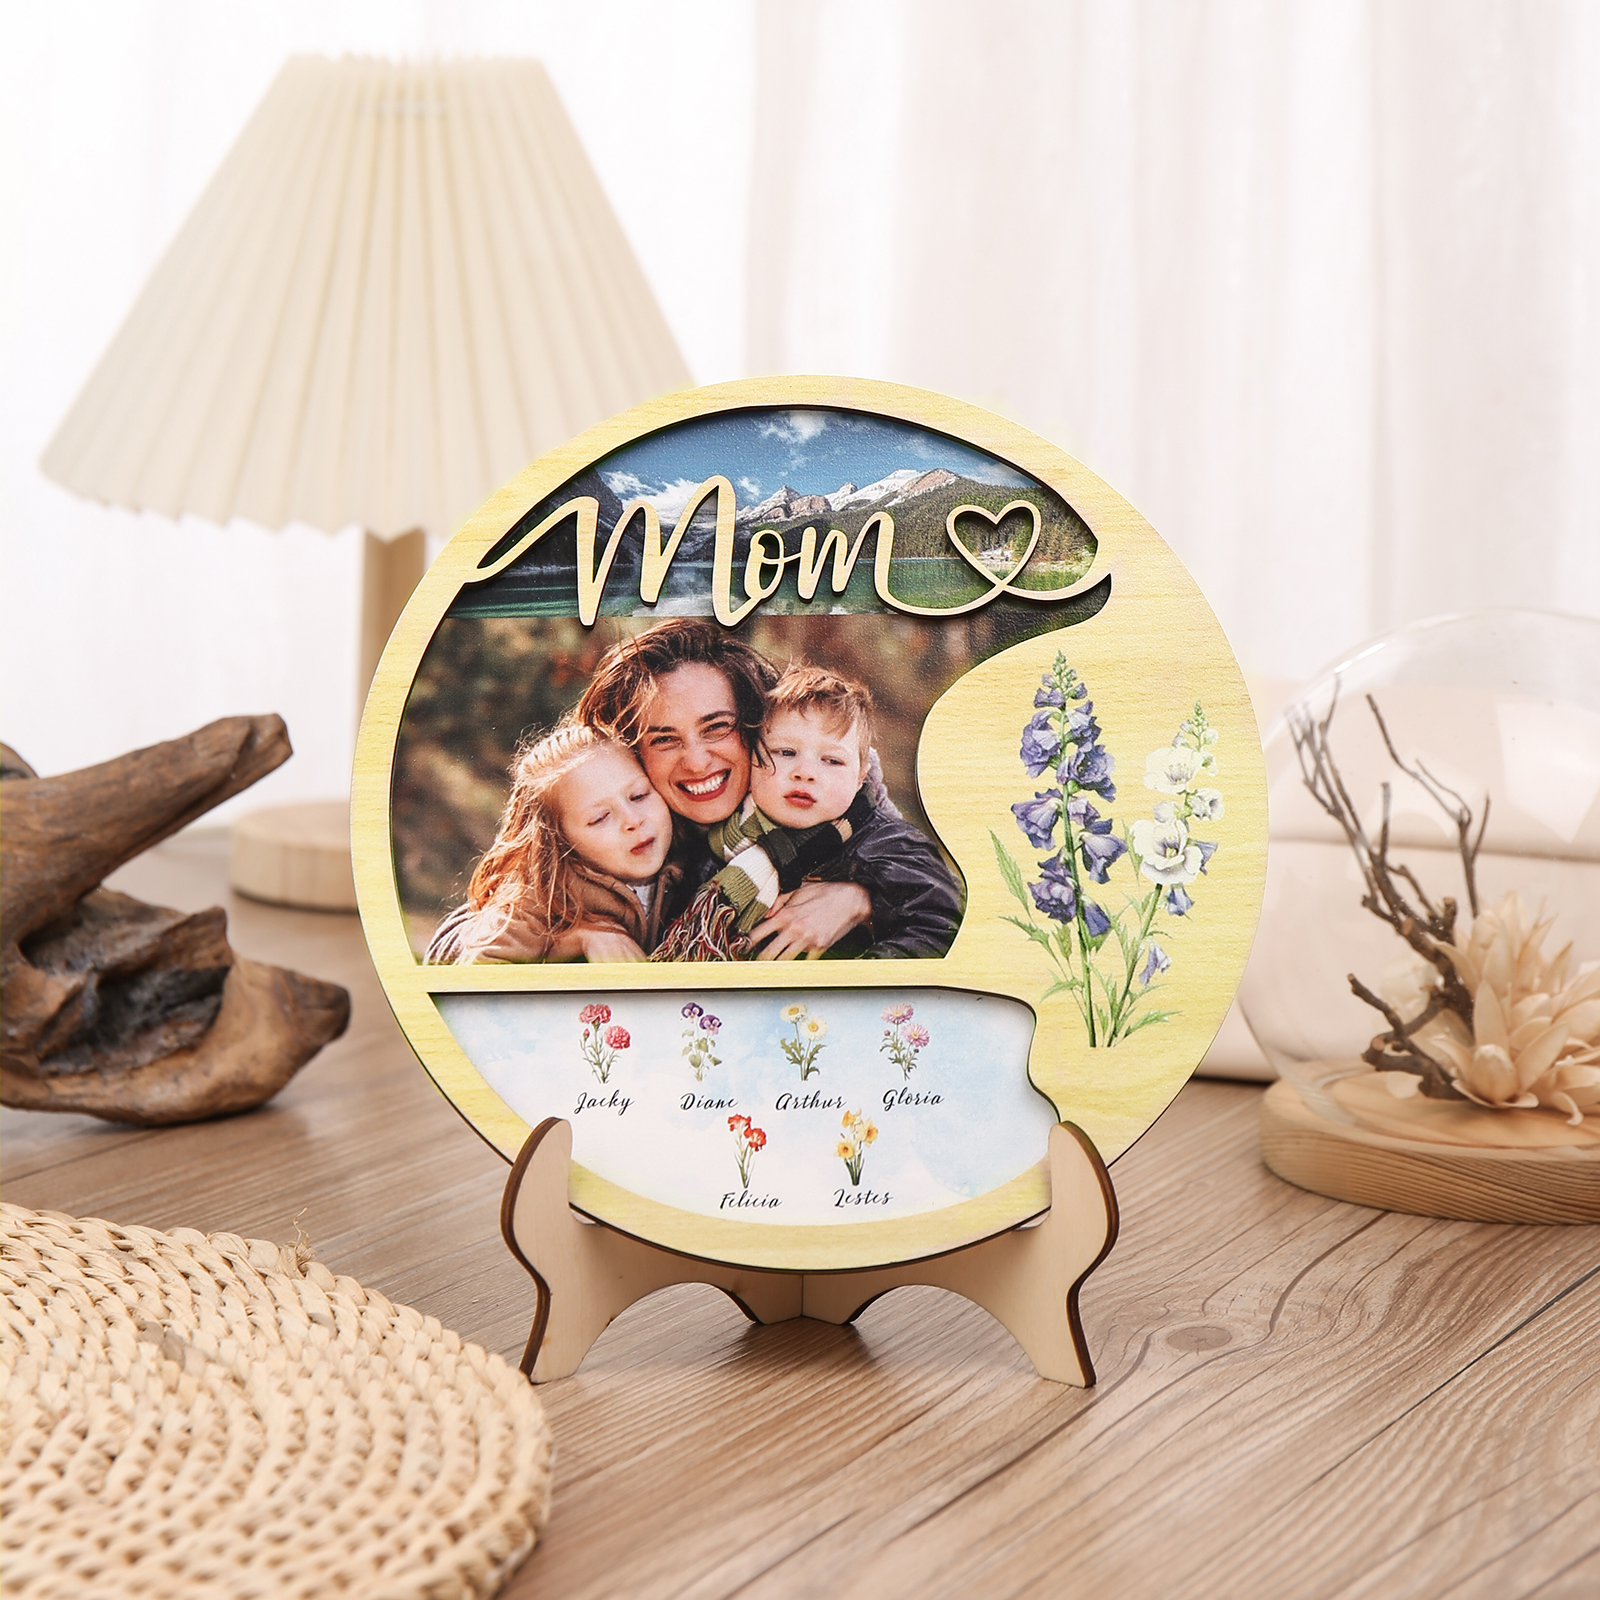 6 Names - Customized Photo Birth Flower Wooden Ornament Decoration for Mom